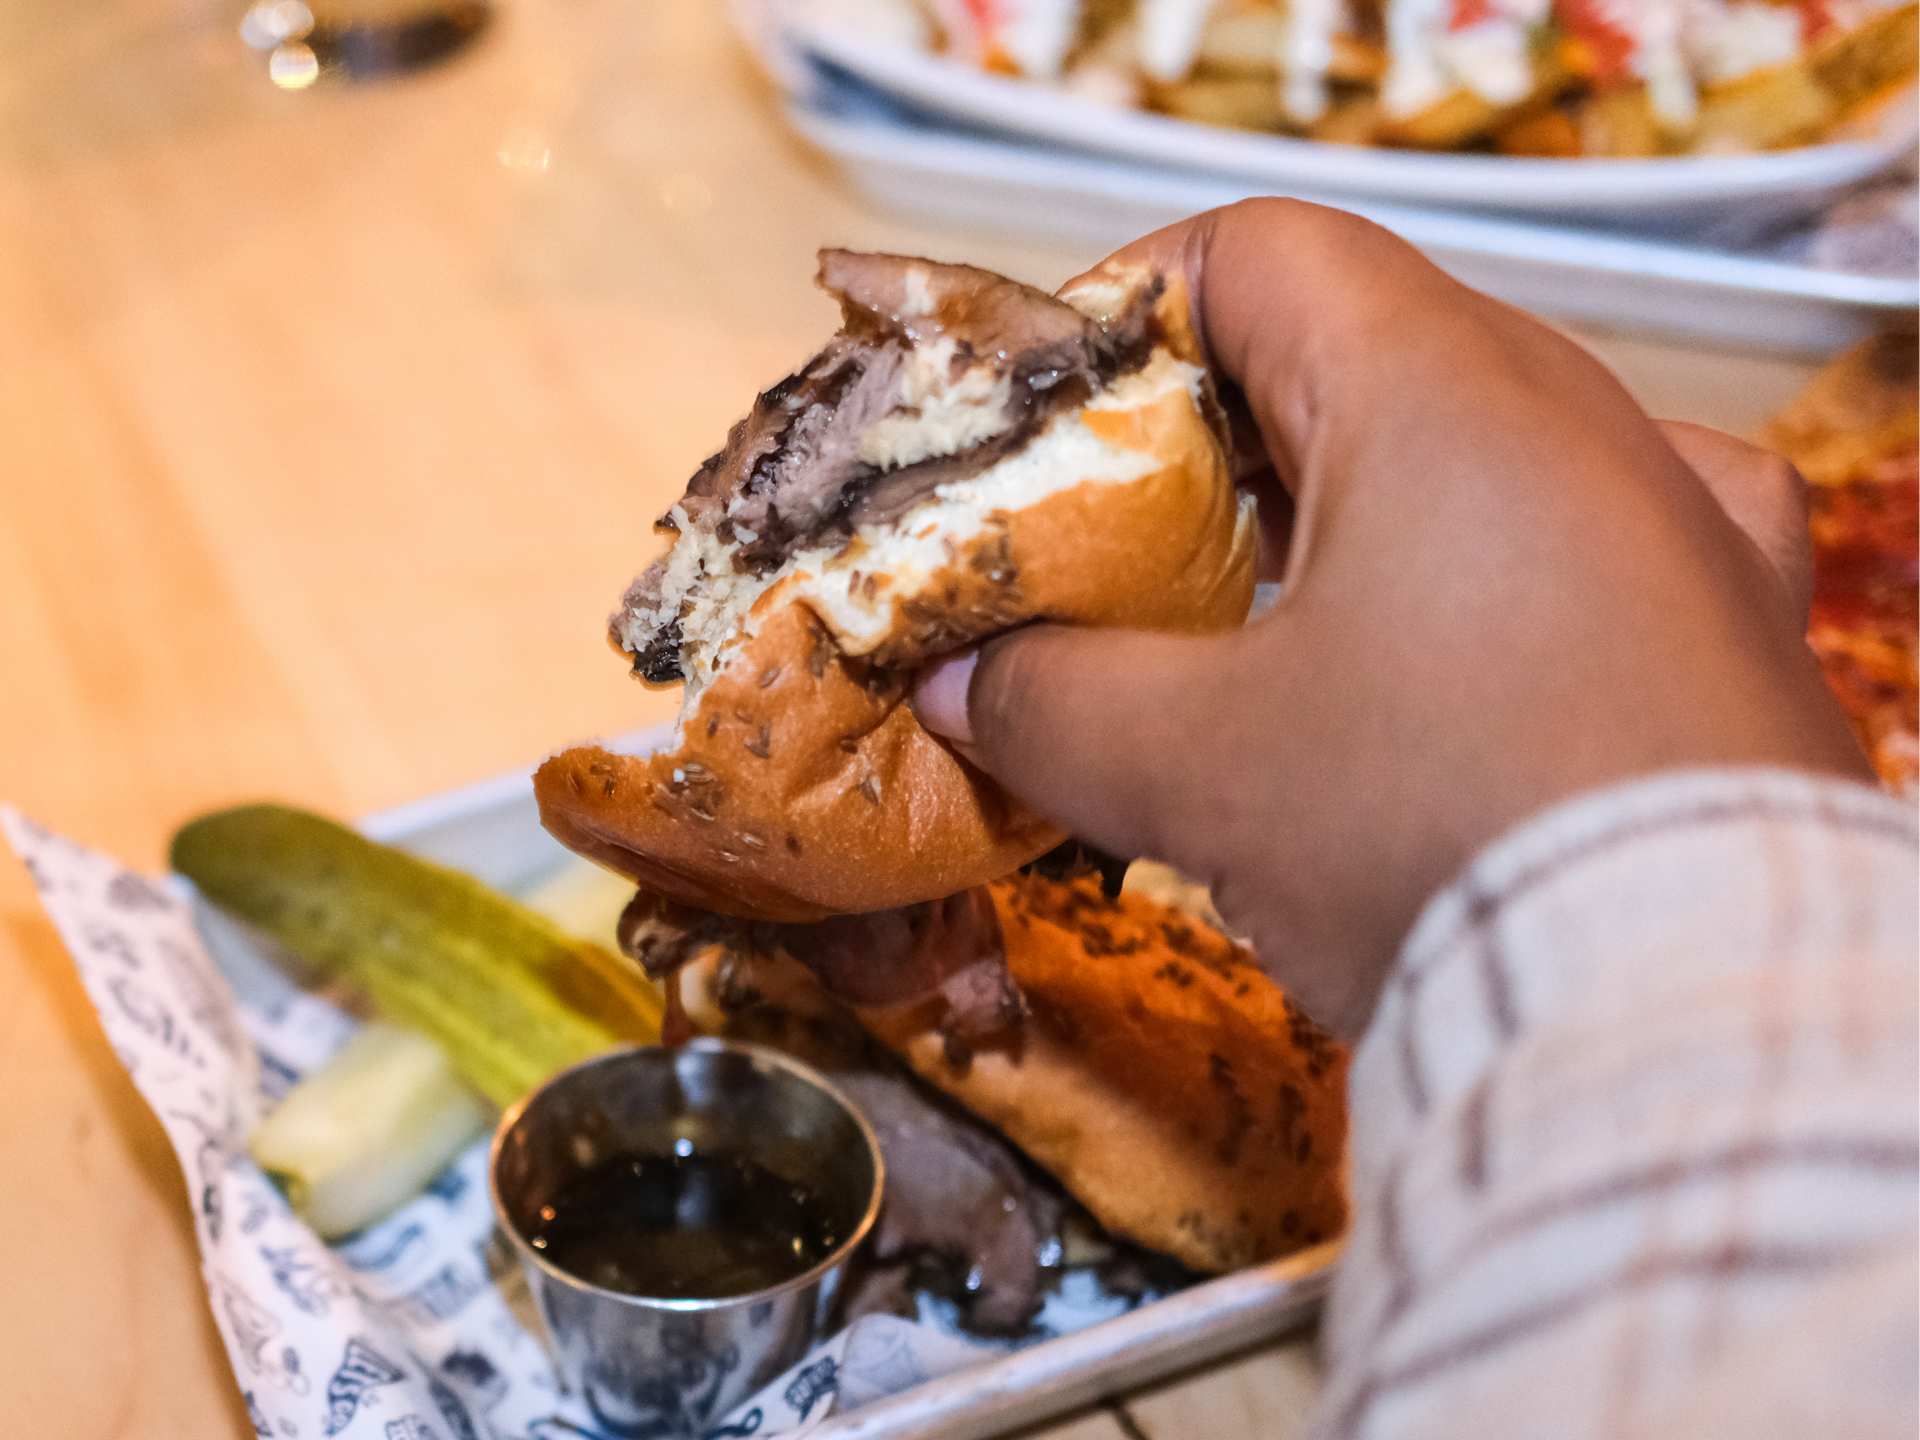 Left Field Brewery, Liberty Village, Toronto | A sandwich at Left Field Brewery